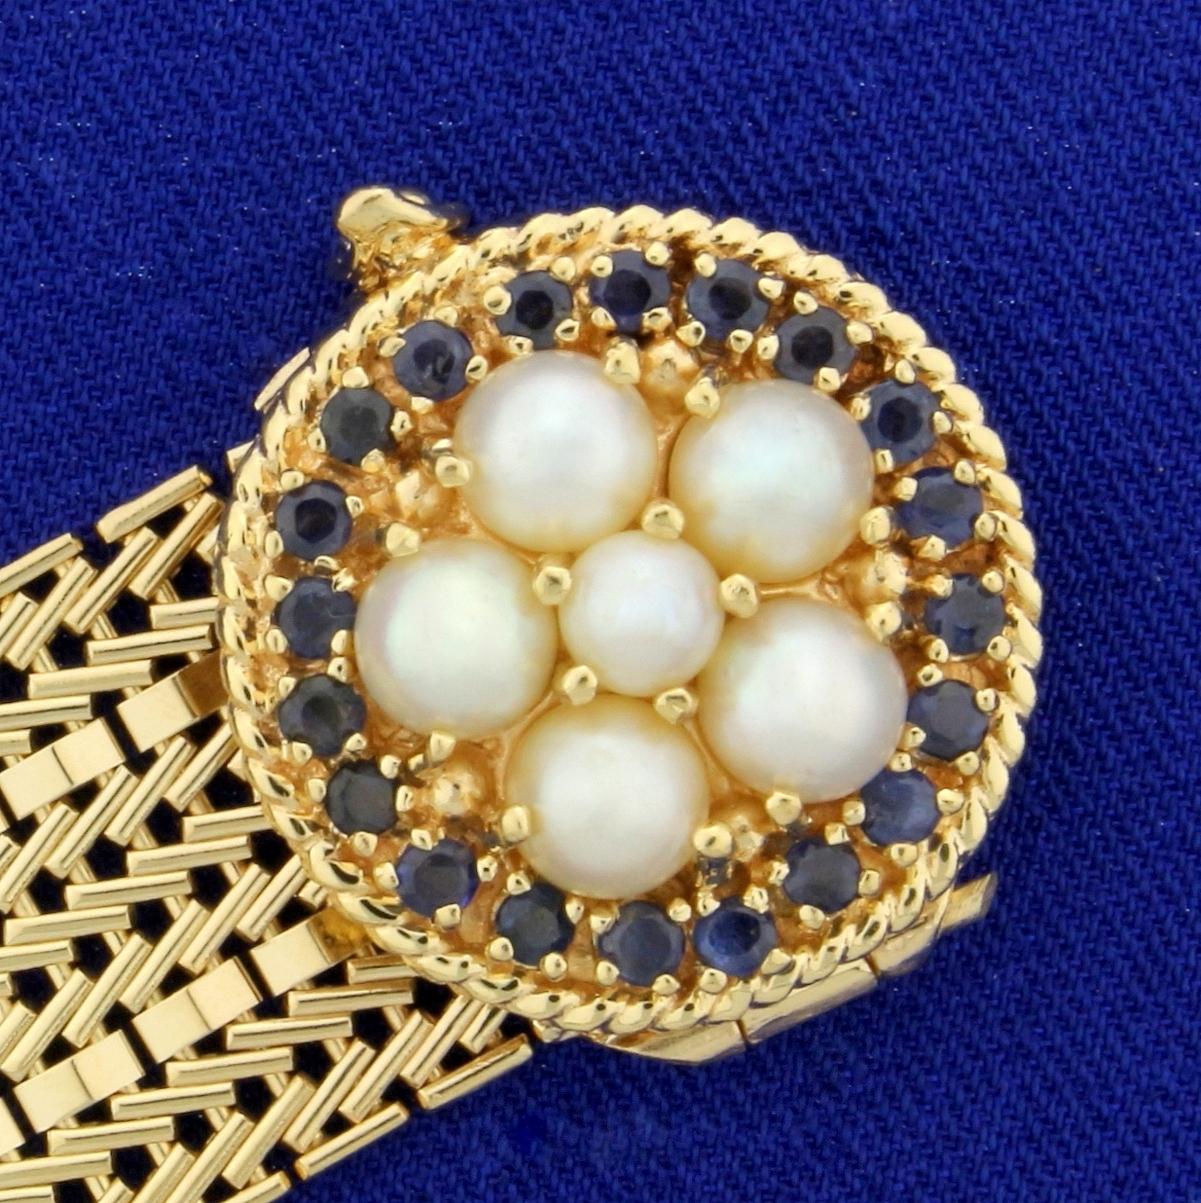 Vintage Victorian Style Adjustable Mesh Design Bracelet With Pearls And Sapphires In 14k Yellow Gold